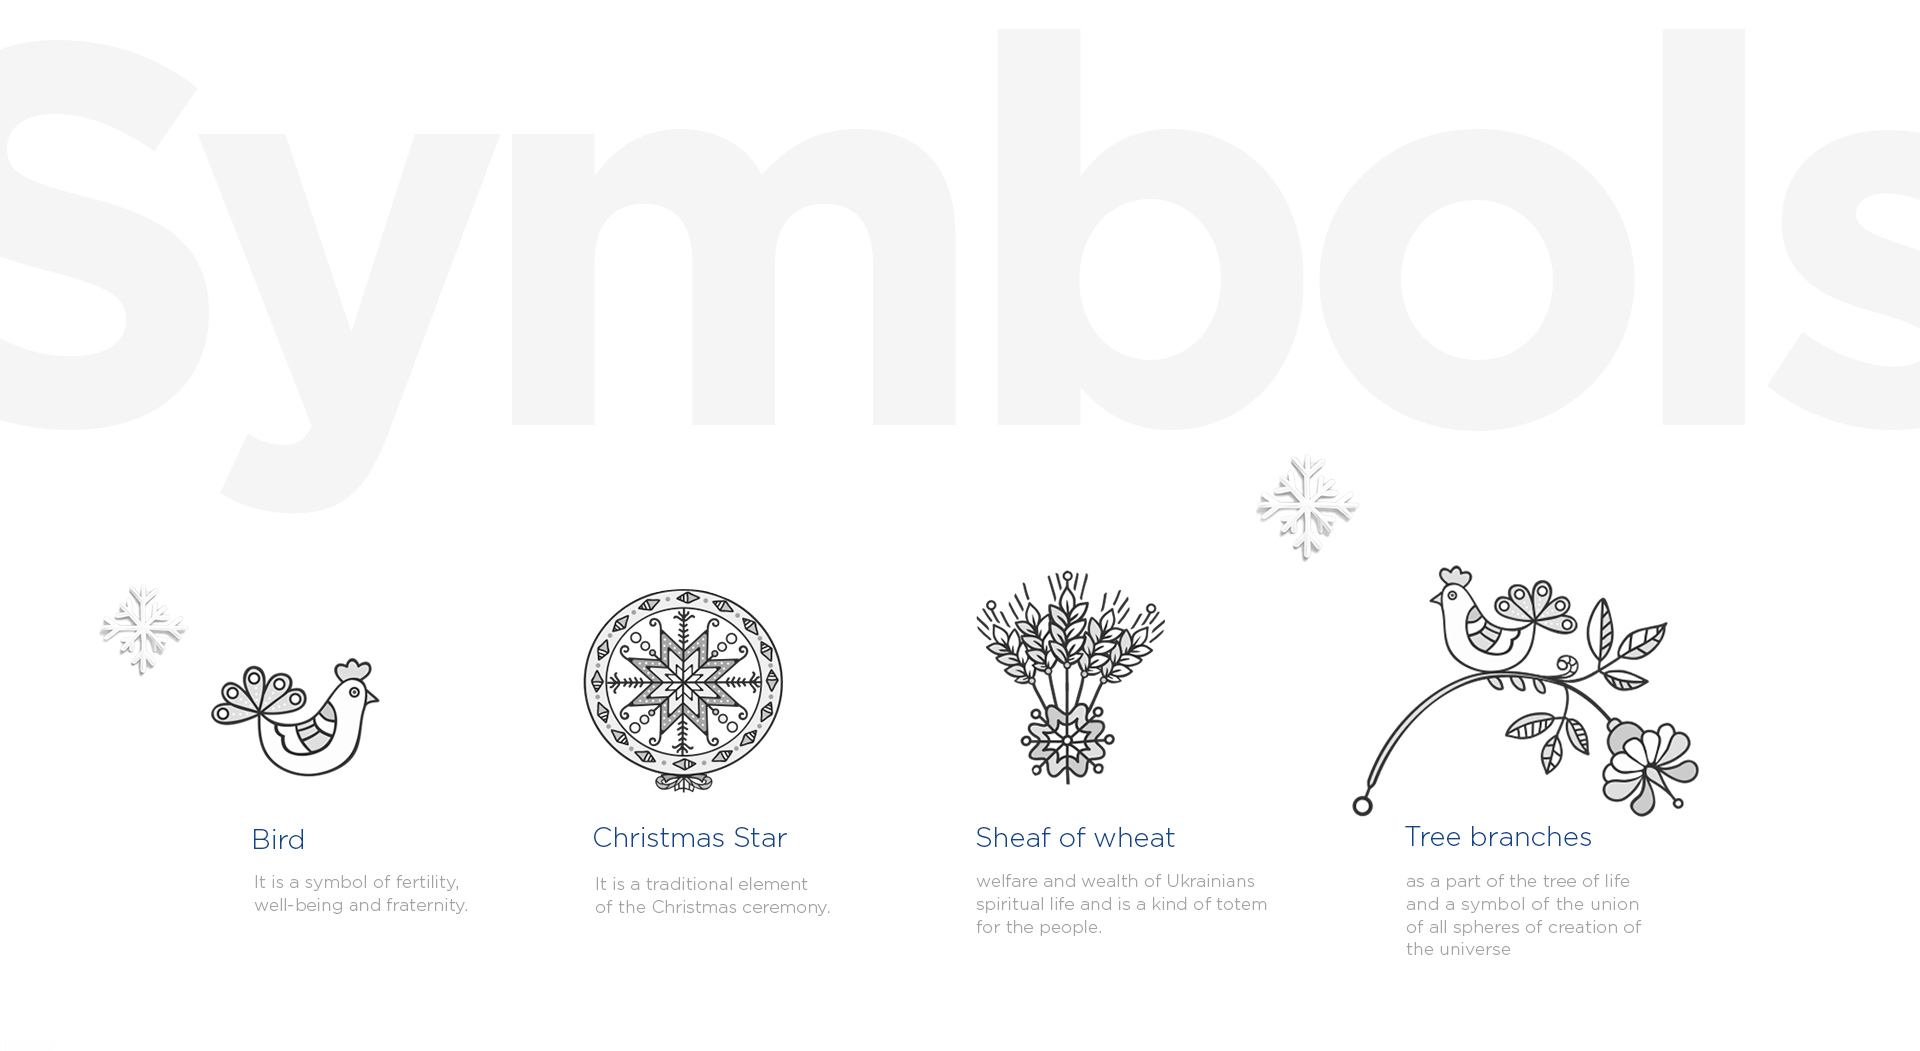 Main symbols are a Bird, Christmas star, Sheaf of wheat and tree branches